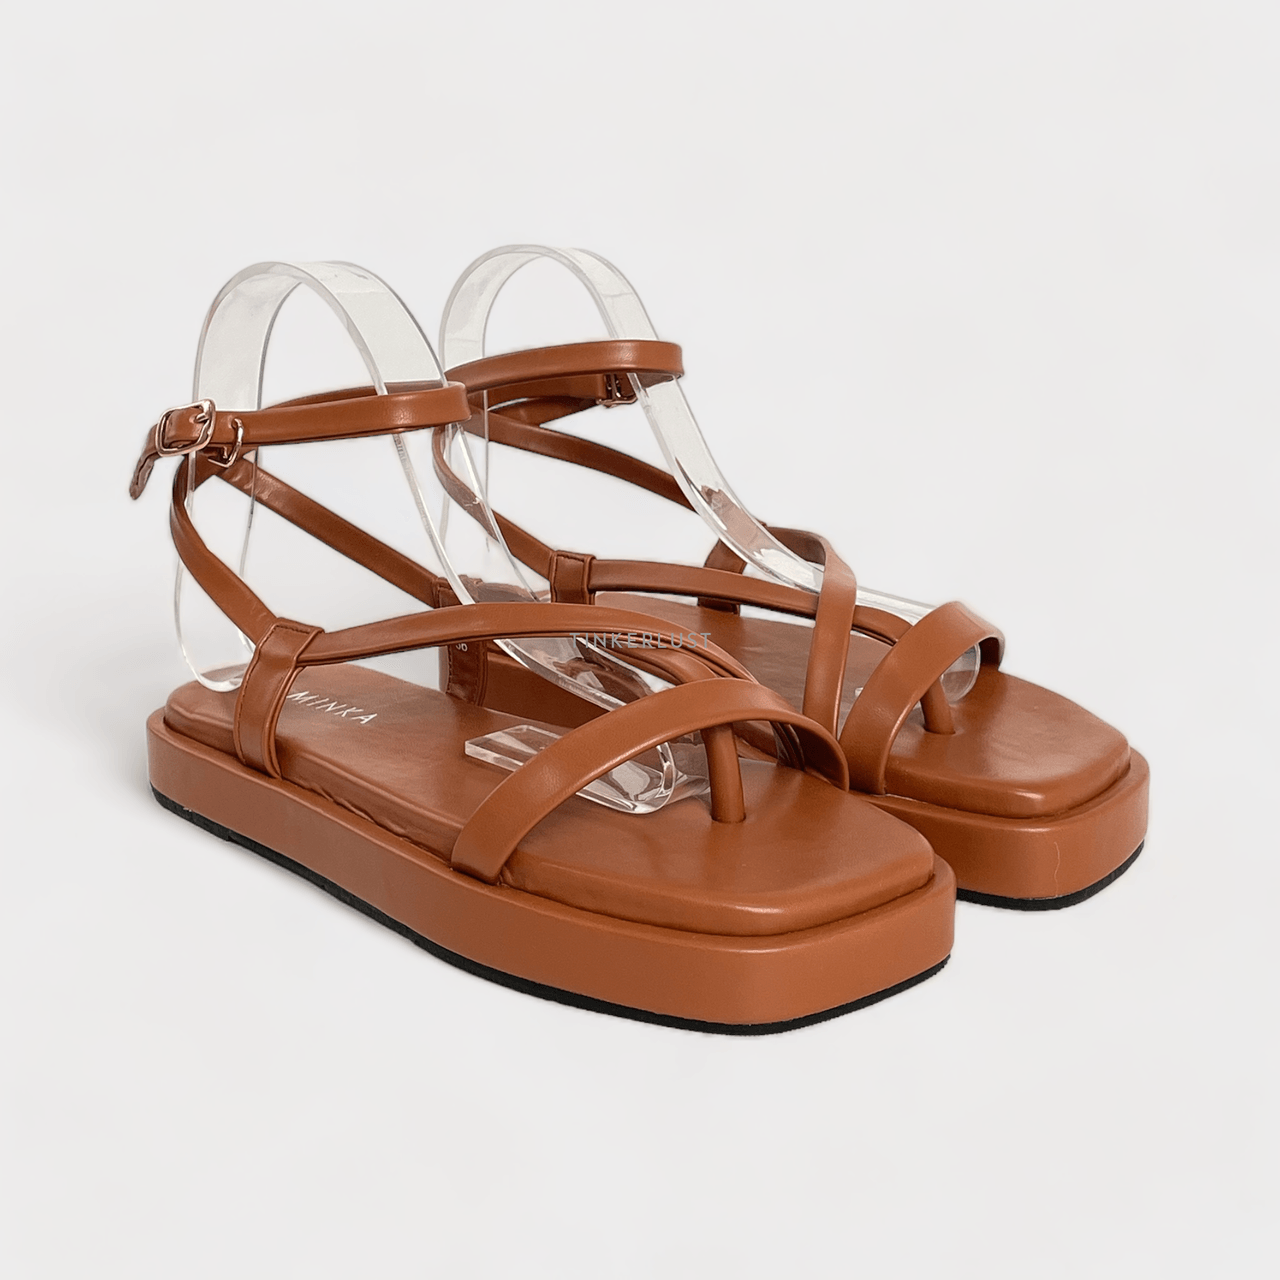 Private Collection Terracota Sandals